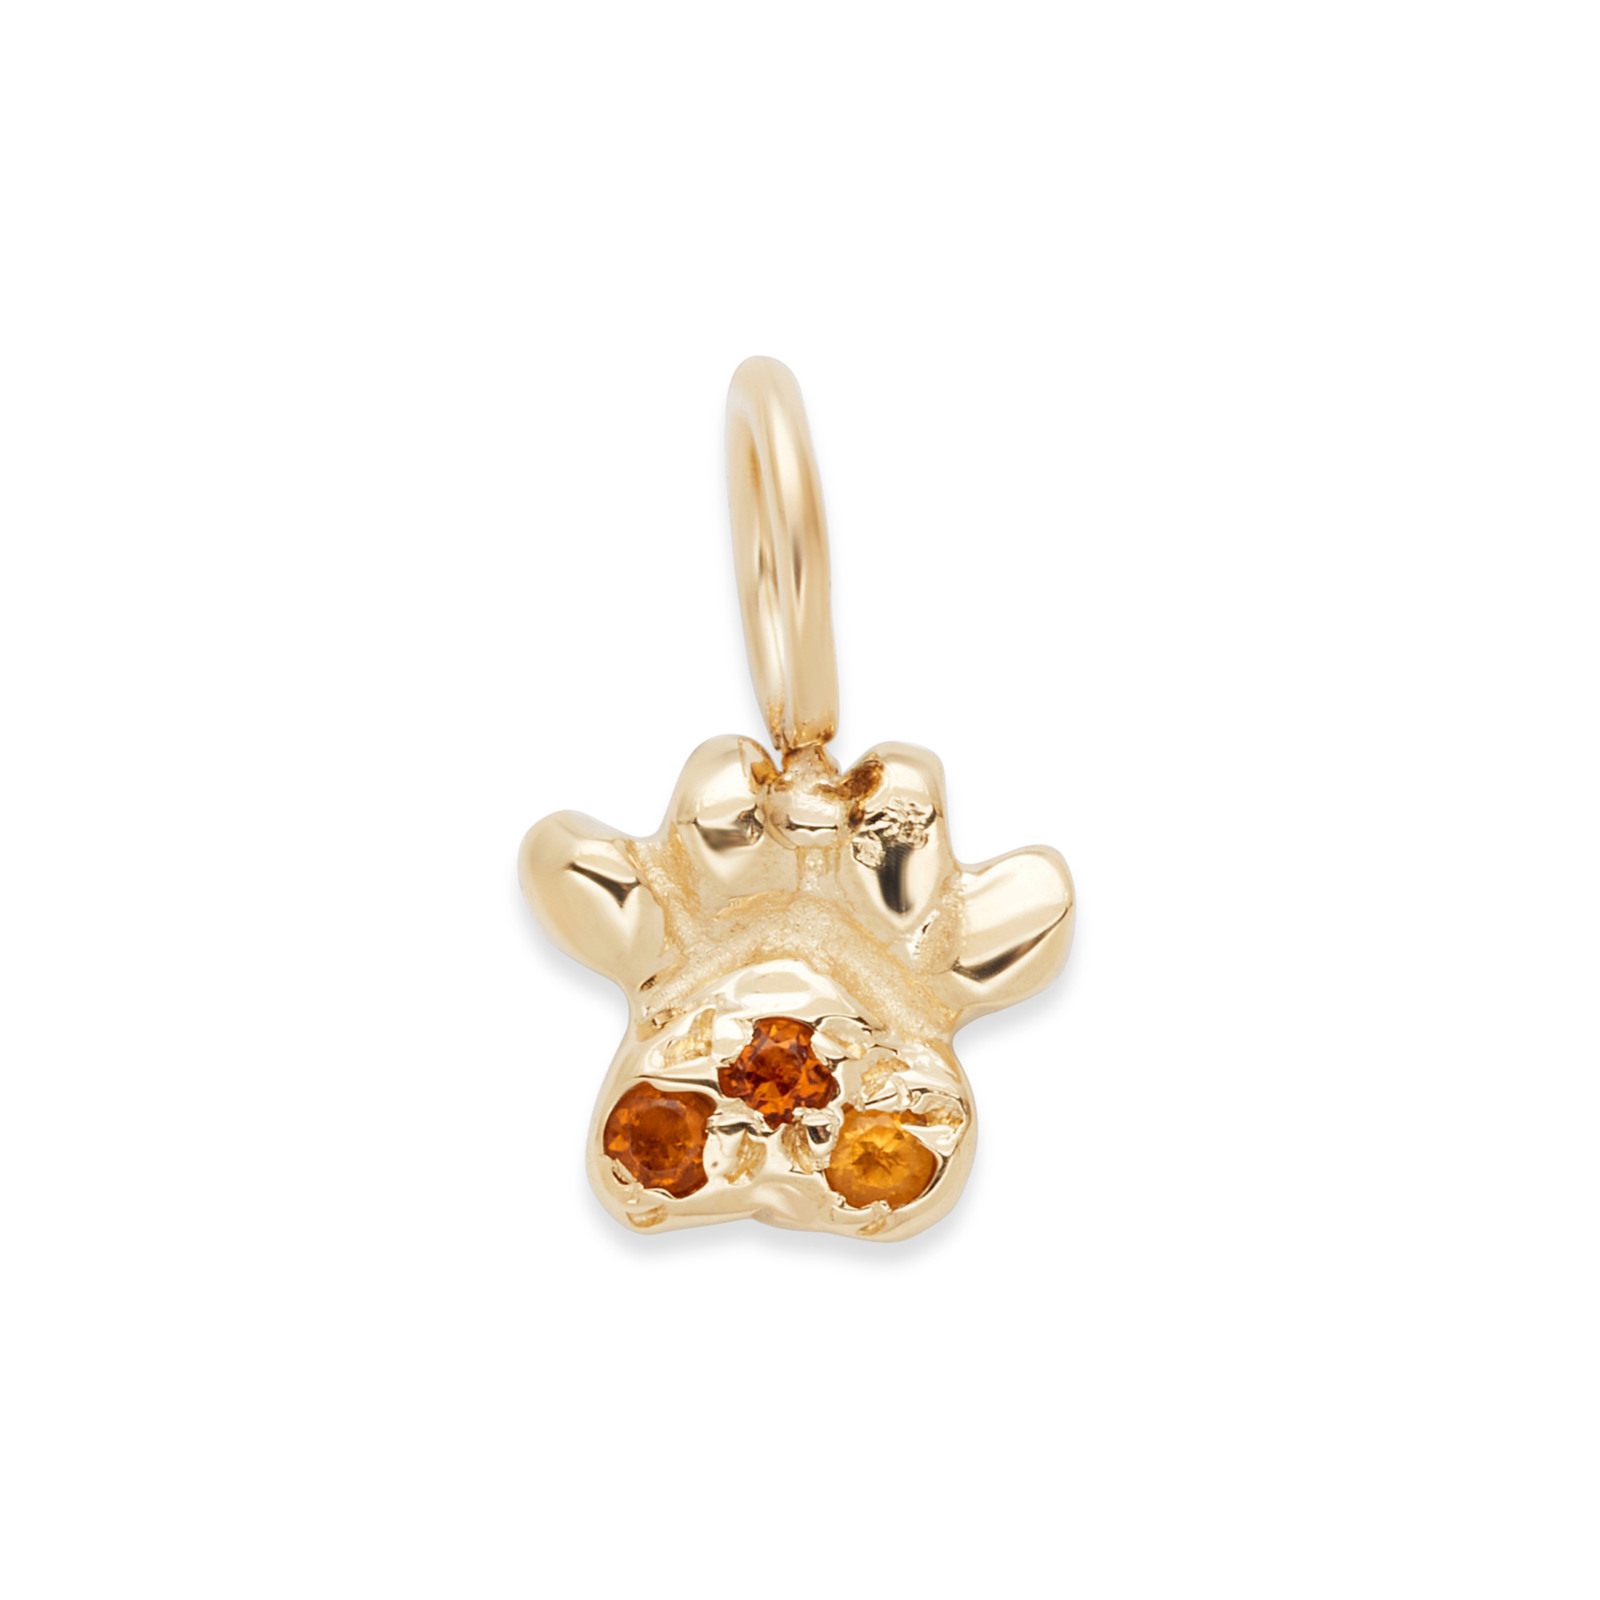 Paw shaped 14k yellow gold charm with citrines - cusotmize which gemstones or meaningful birthstones